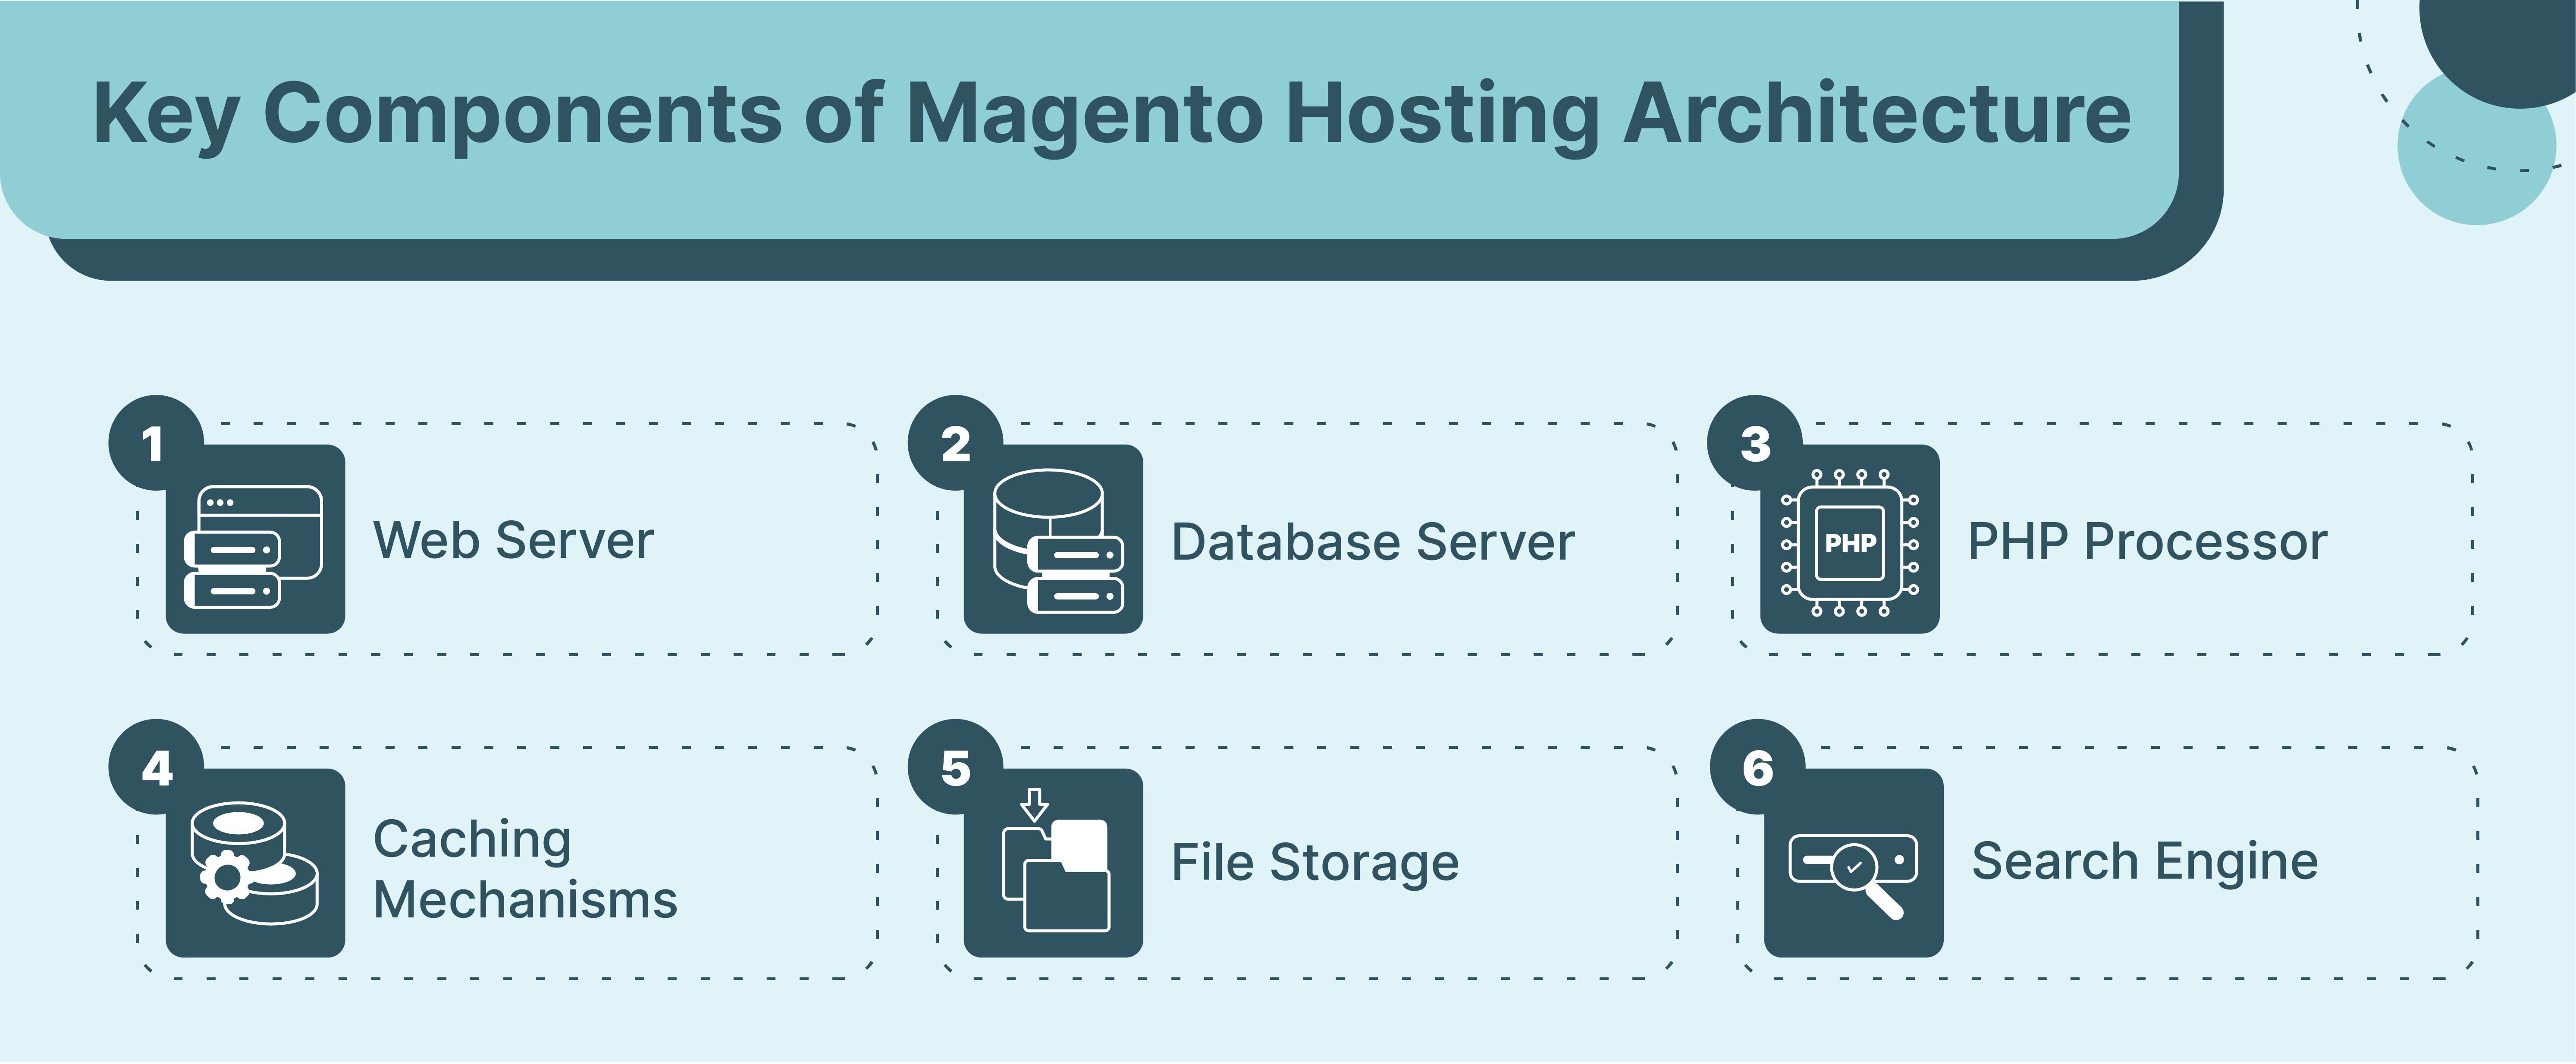 Illustration of Magento Hosting Architecture Components